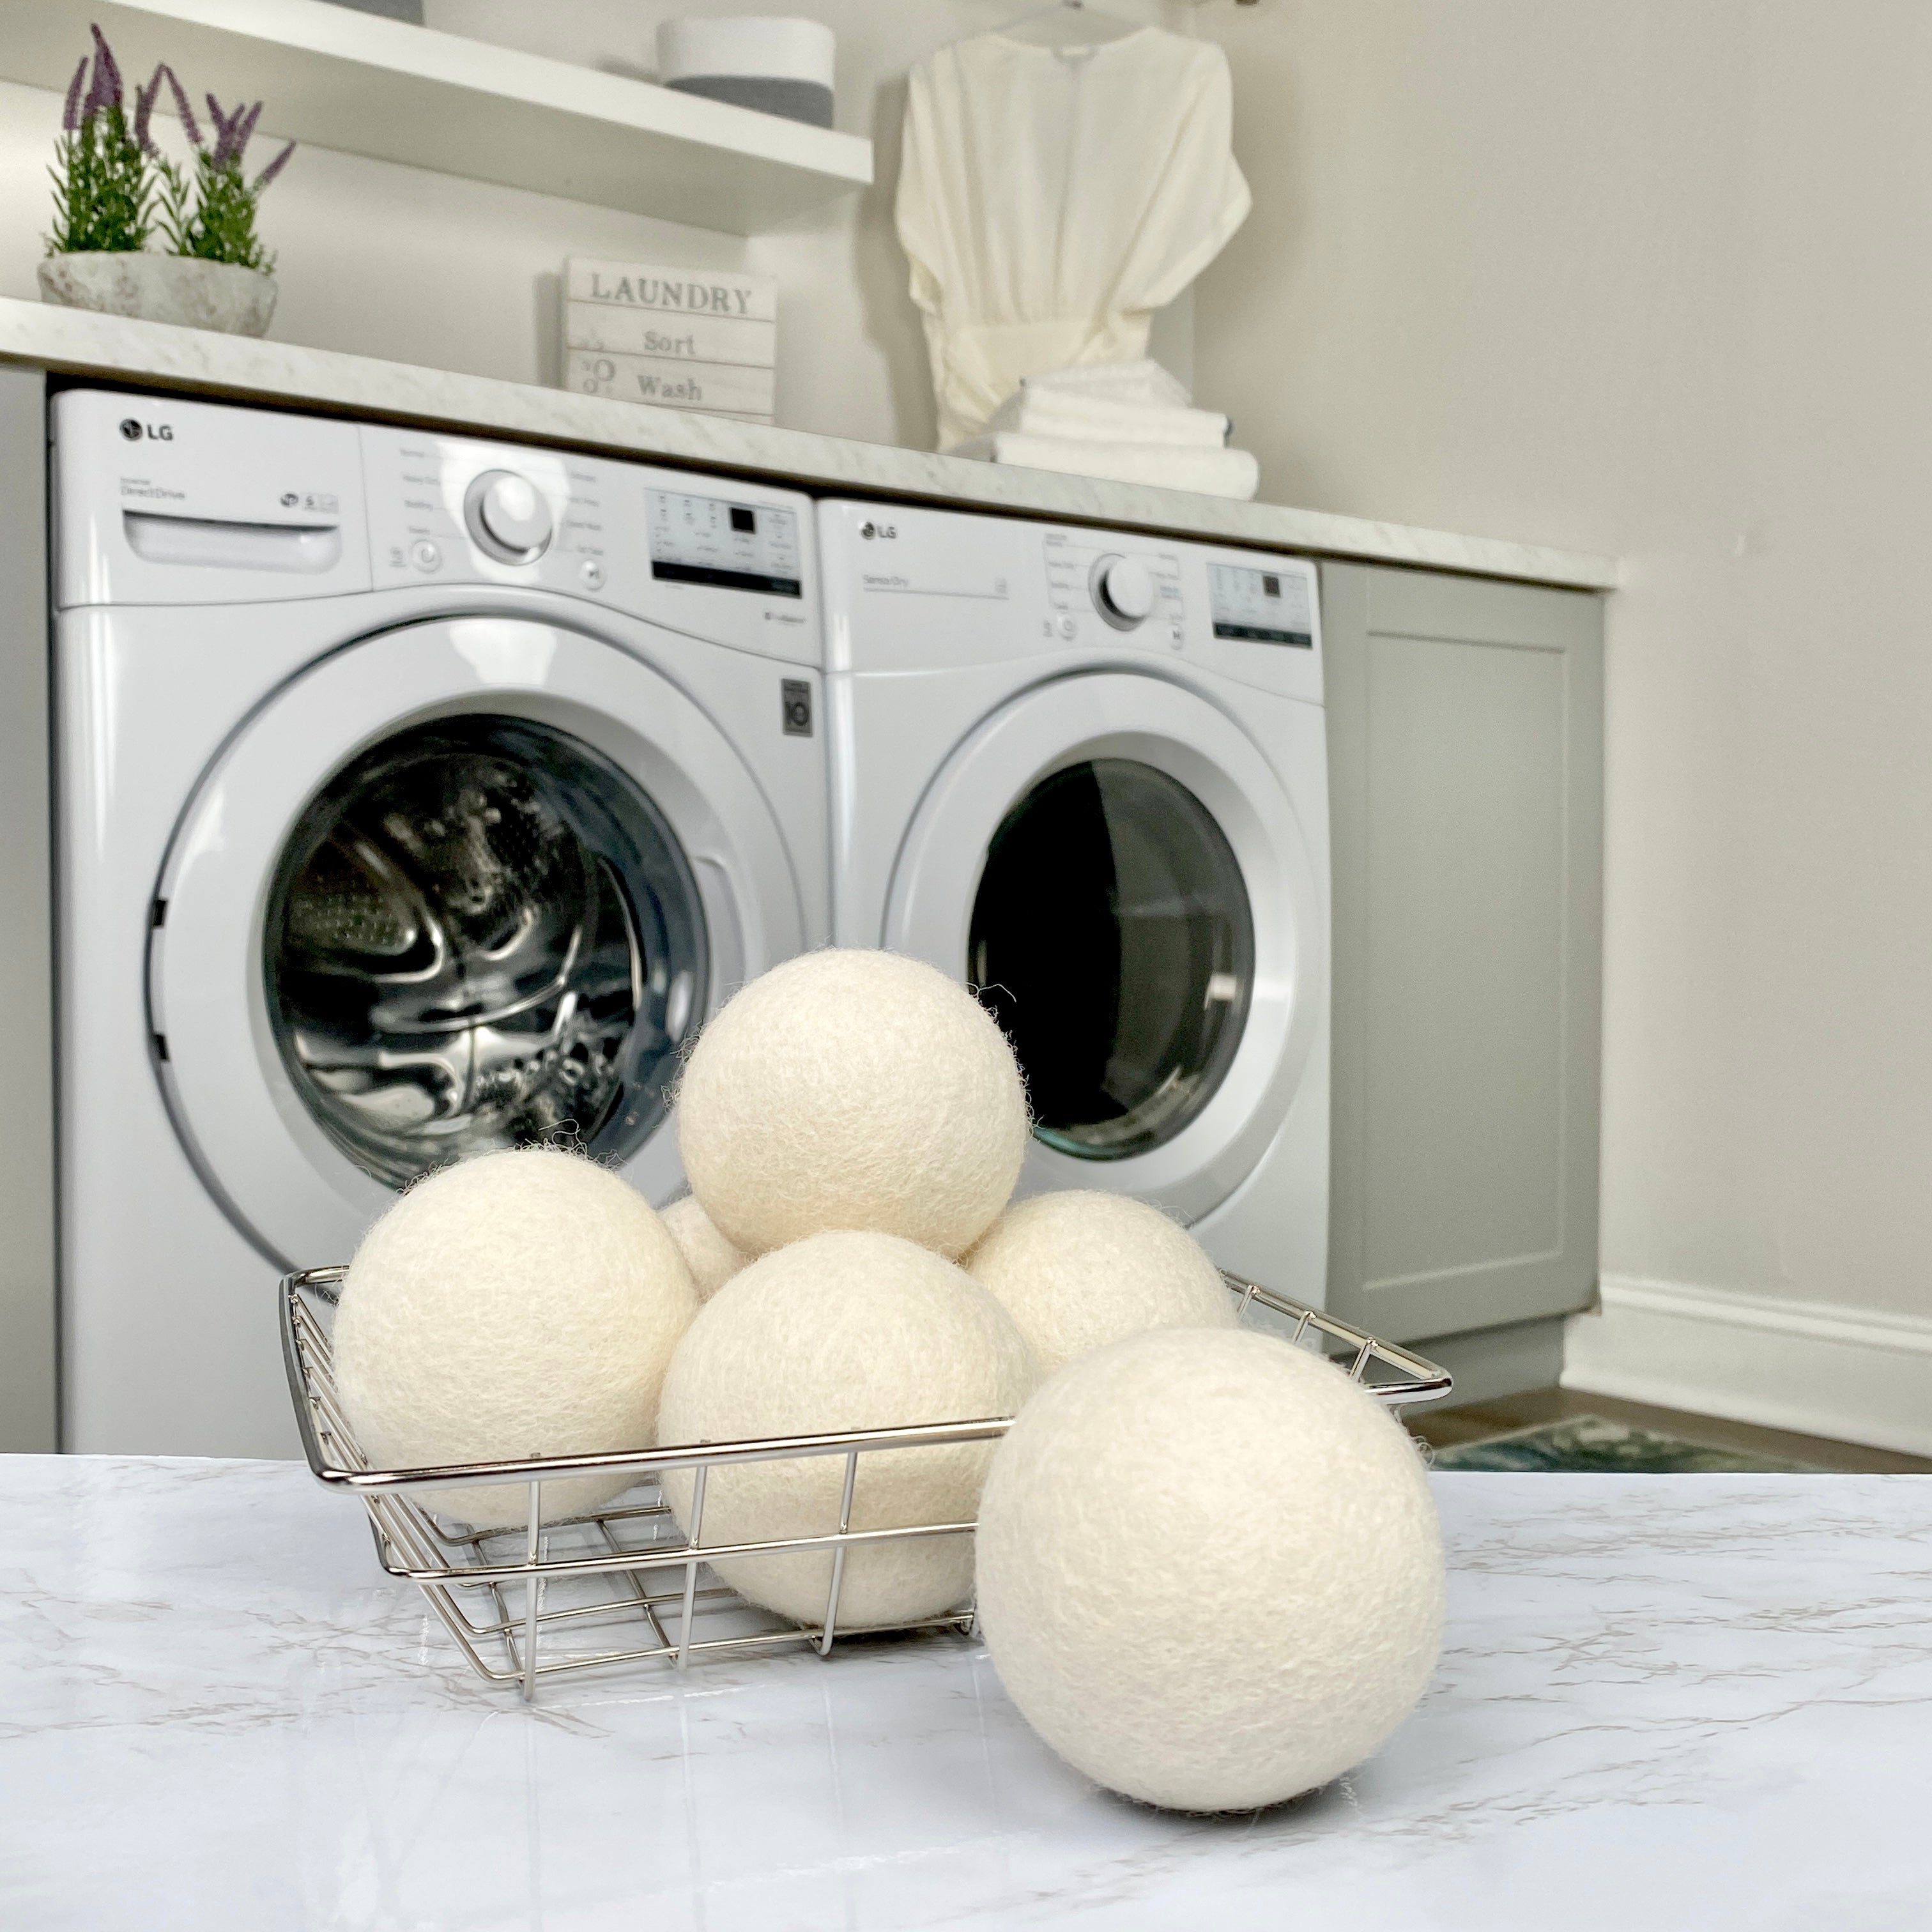 Use wool dryer balls instead of dryer sheets